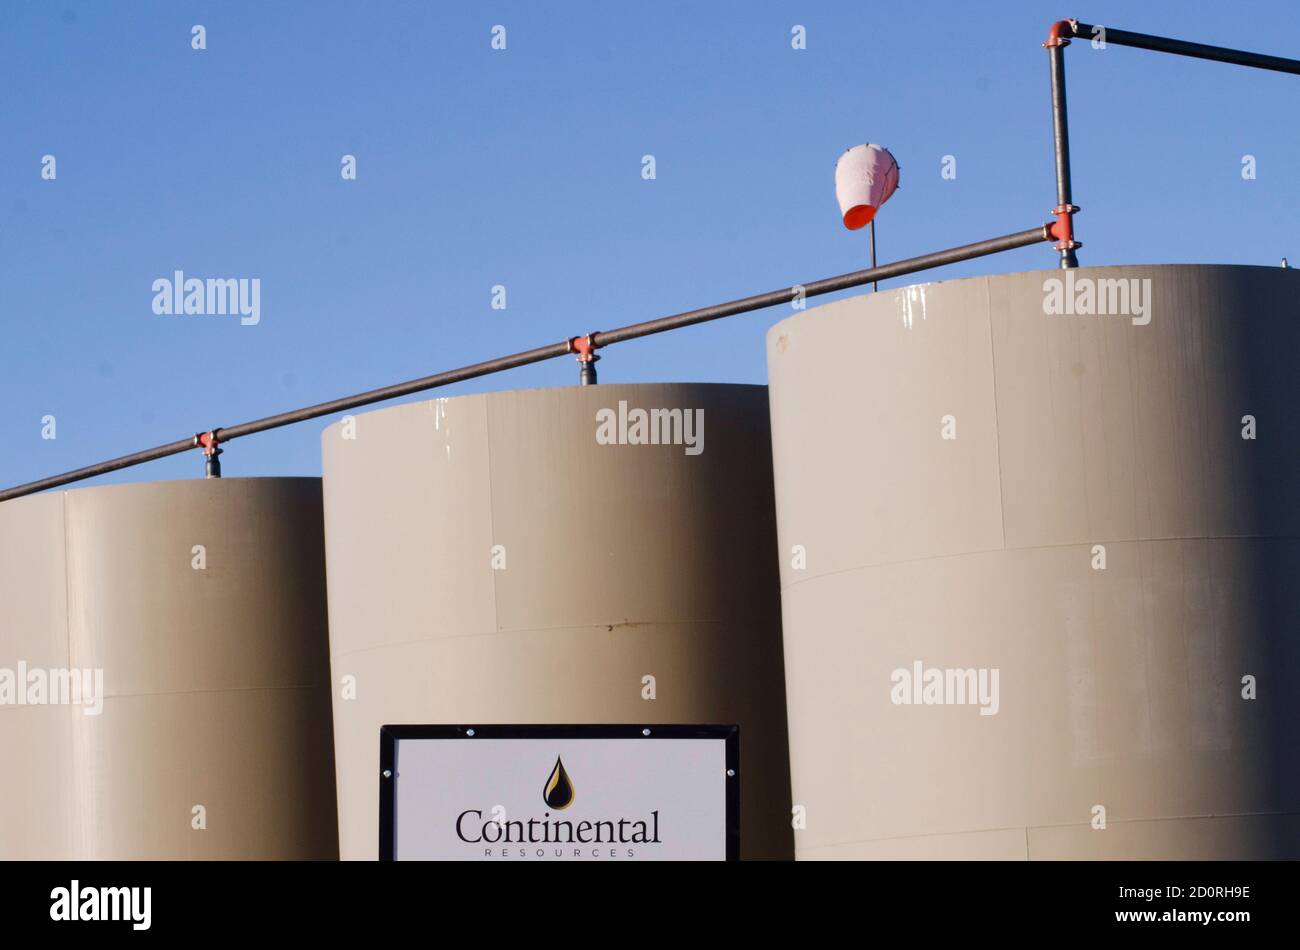 Storage tanks stand on a Continental Resources oil production site near Williston, North Dakota January 23, 2015.  REUTERS/Andrew Cullen   (UNITED STATES - Tags: BUSINESS ENERGY COMMODITIES) Stock Photo